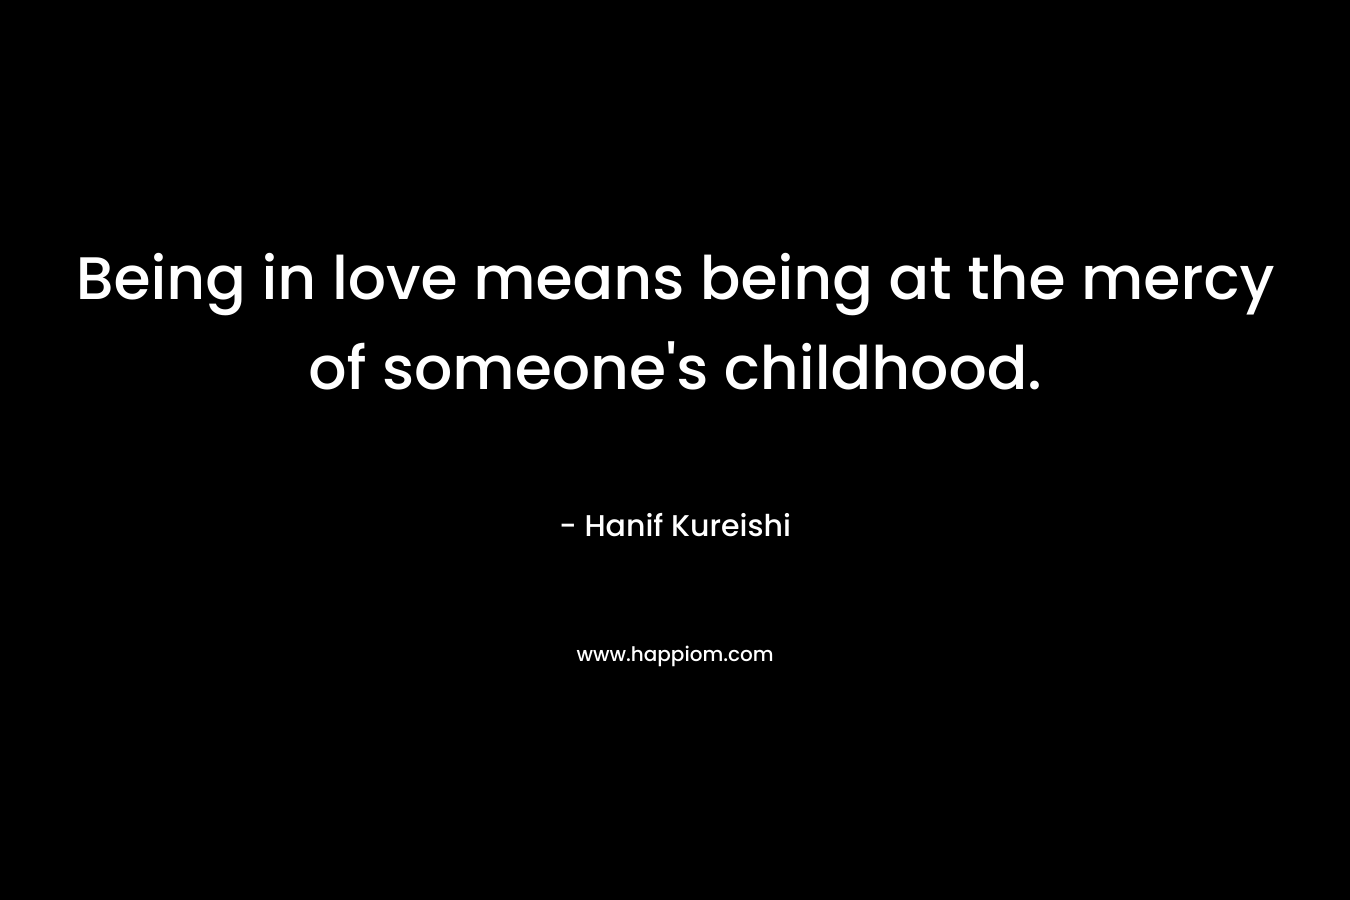 Being in love means being at the mercy of someone’s childhood. – Hanif Kureishi